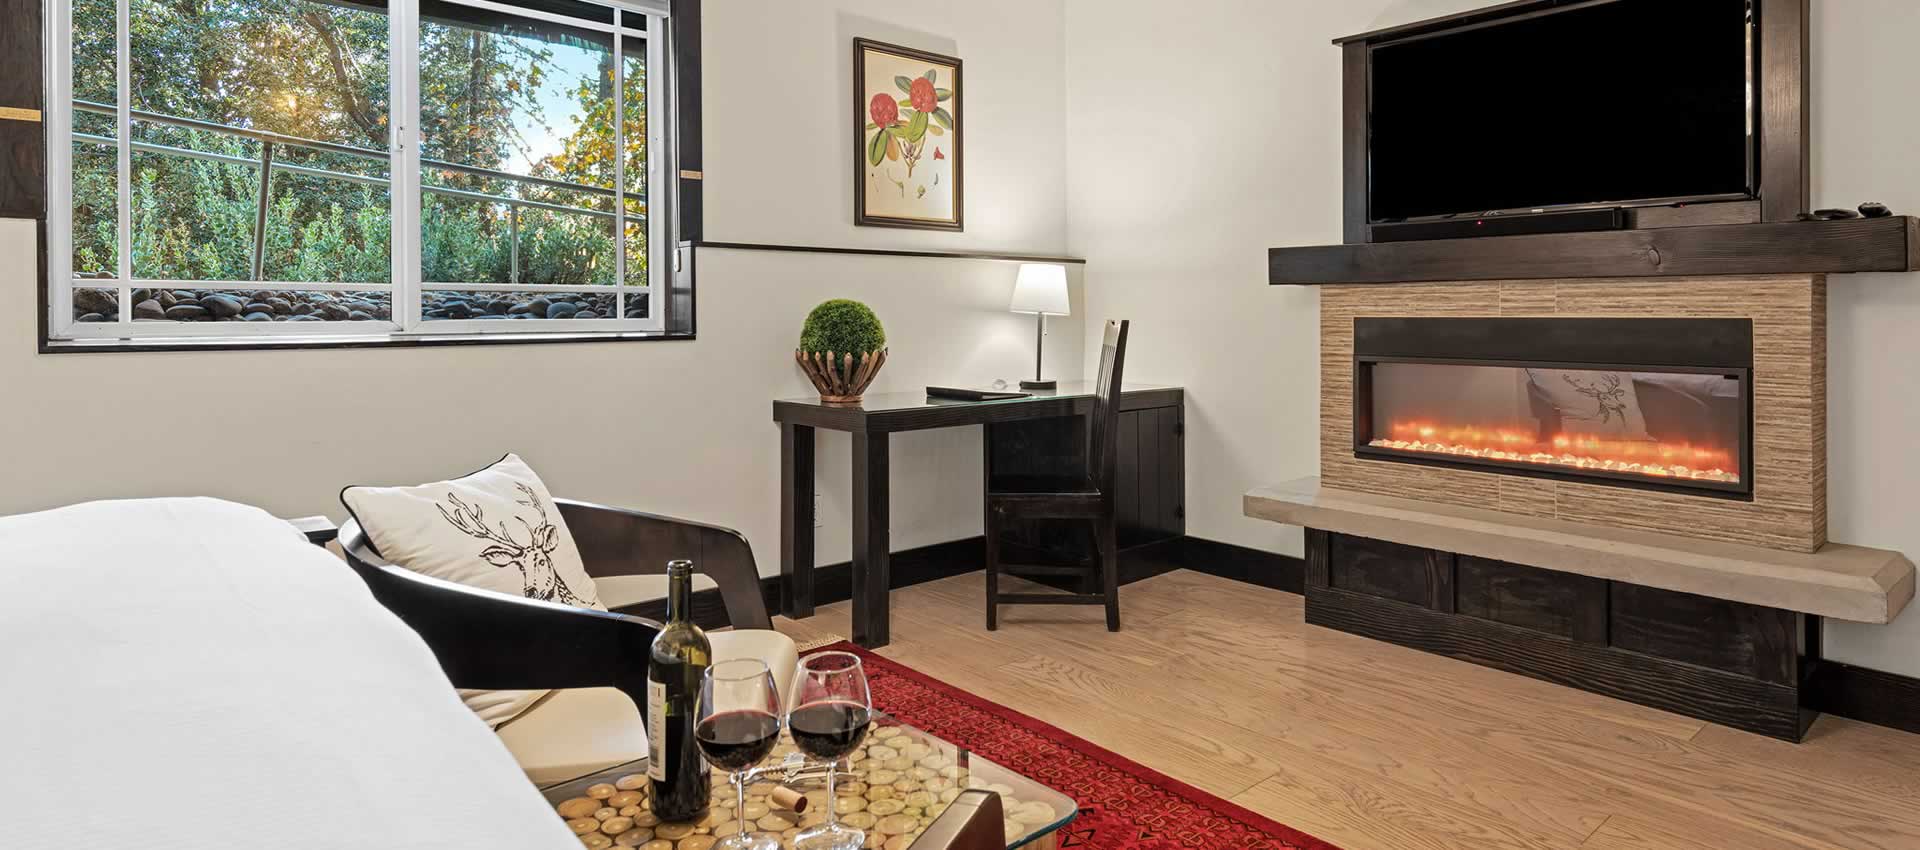 Suite Ambiance sitting area with electric fireplace